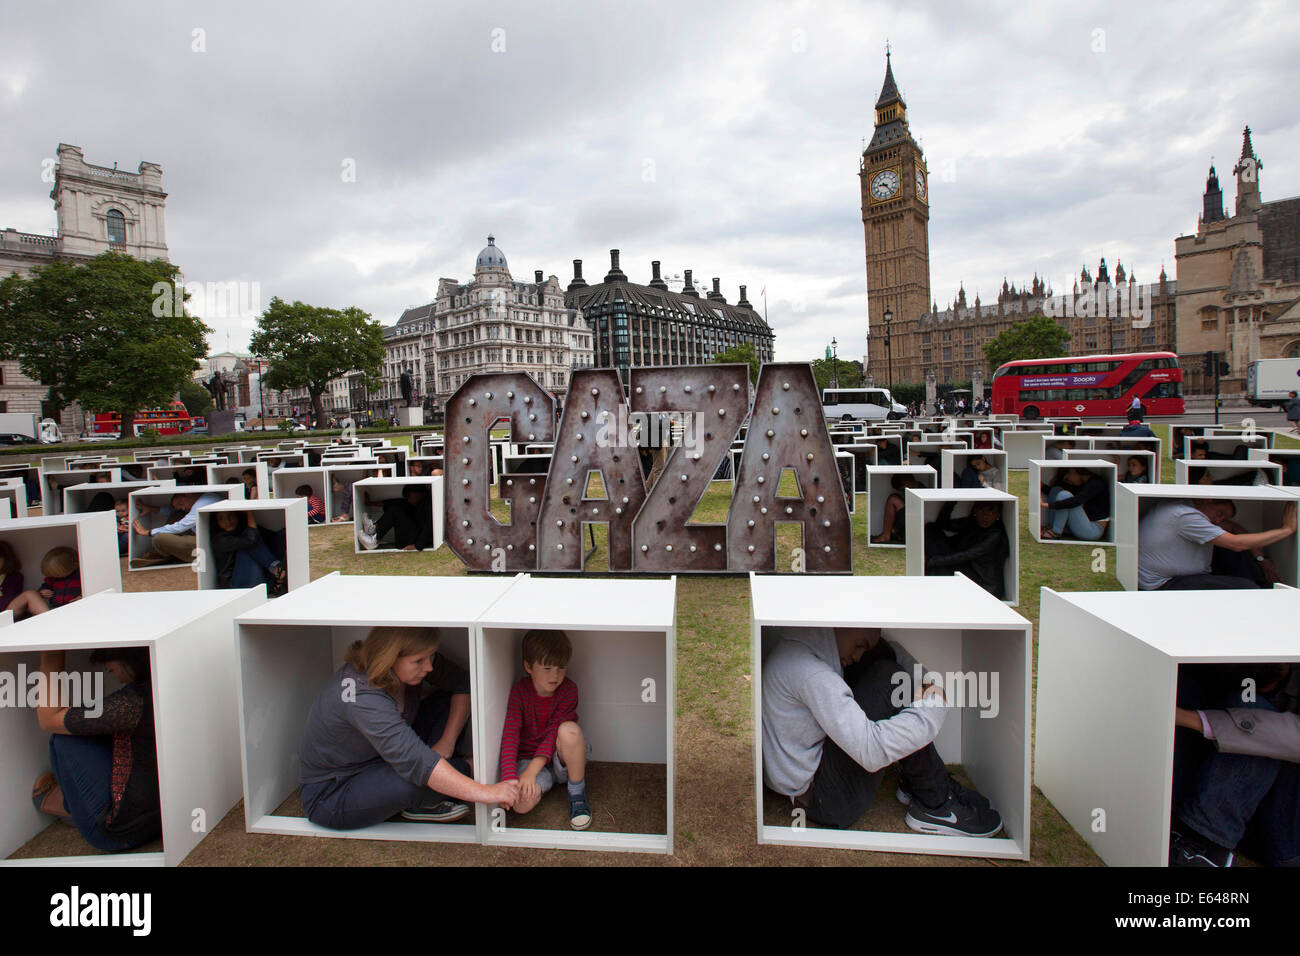 London, UK, Thursday 14th August 2014. In Parliament Square, 150 men, women and children are squashed inside boxes for an Oxfam stunt to illustrate the conditions faced by the people in Gaza who are trapped by the blockade. Credit:  Michael Kemp/Alamy Live News Stock Photo